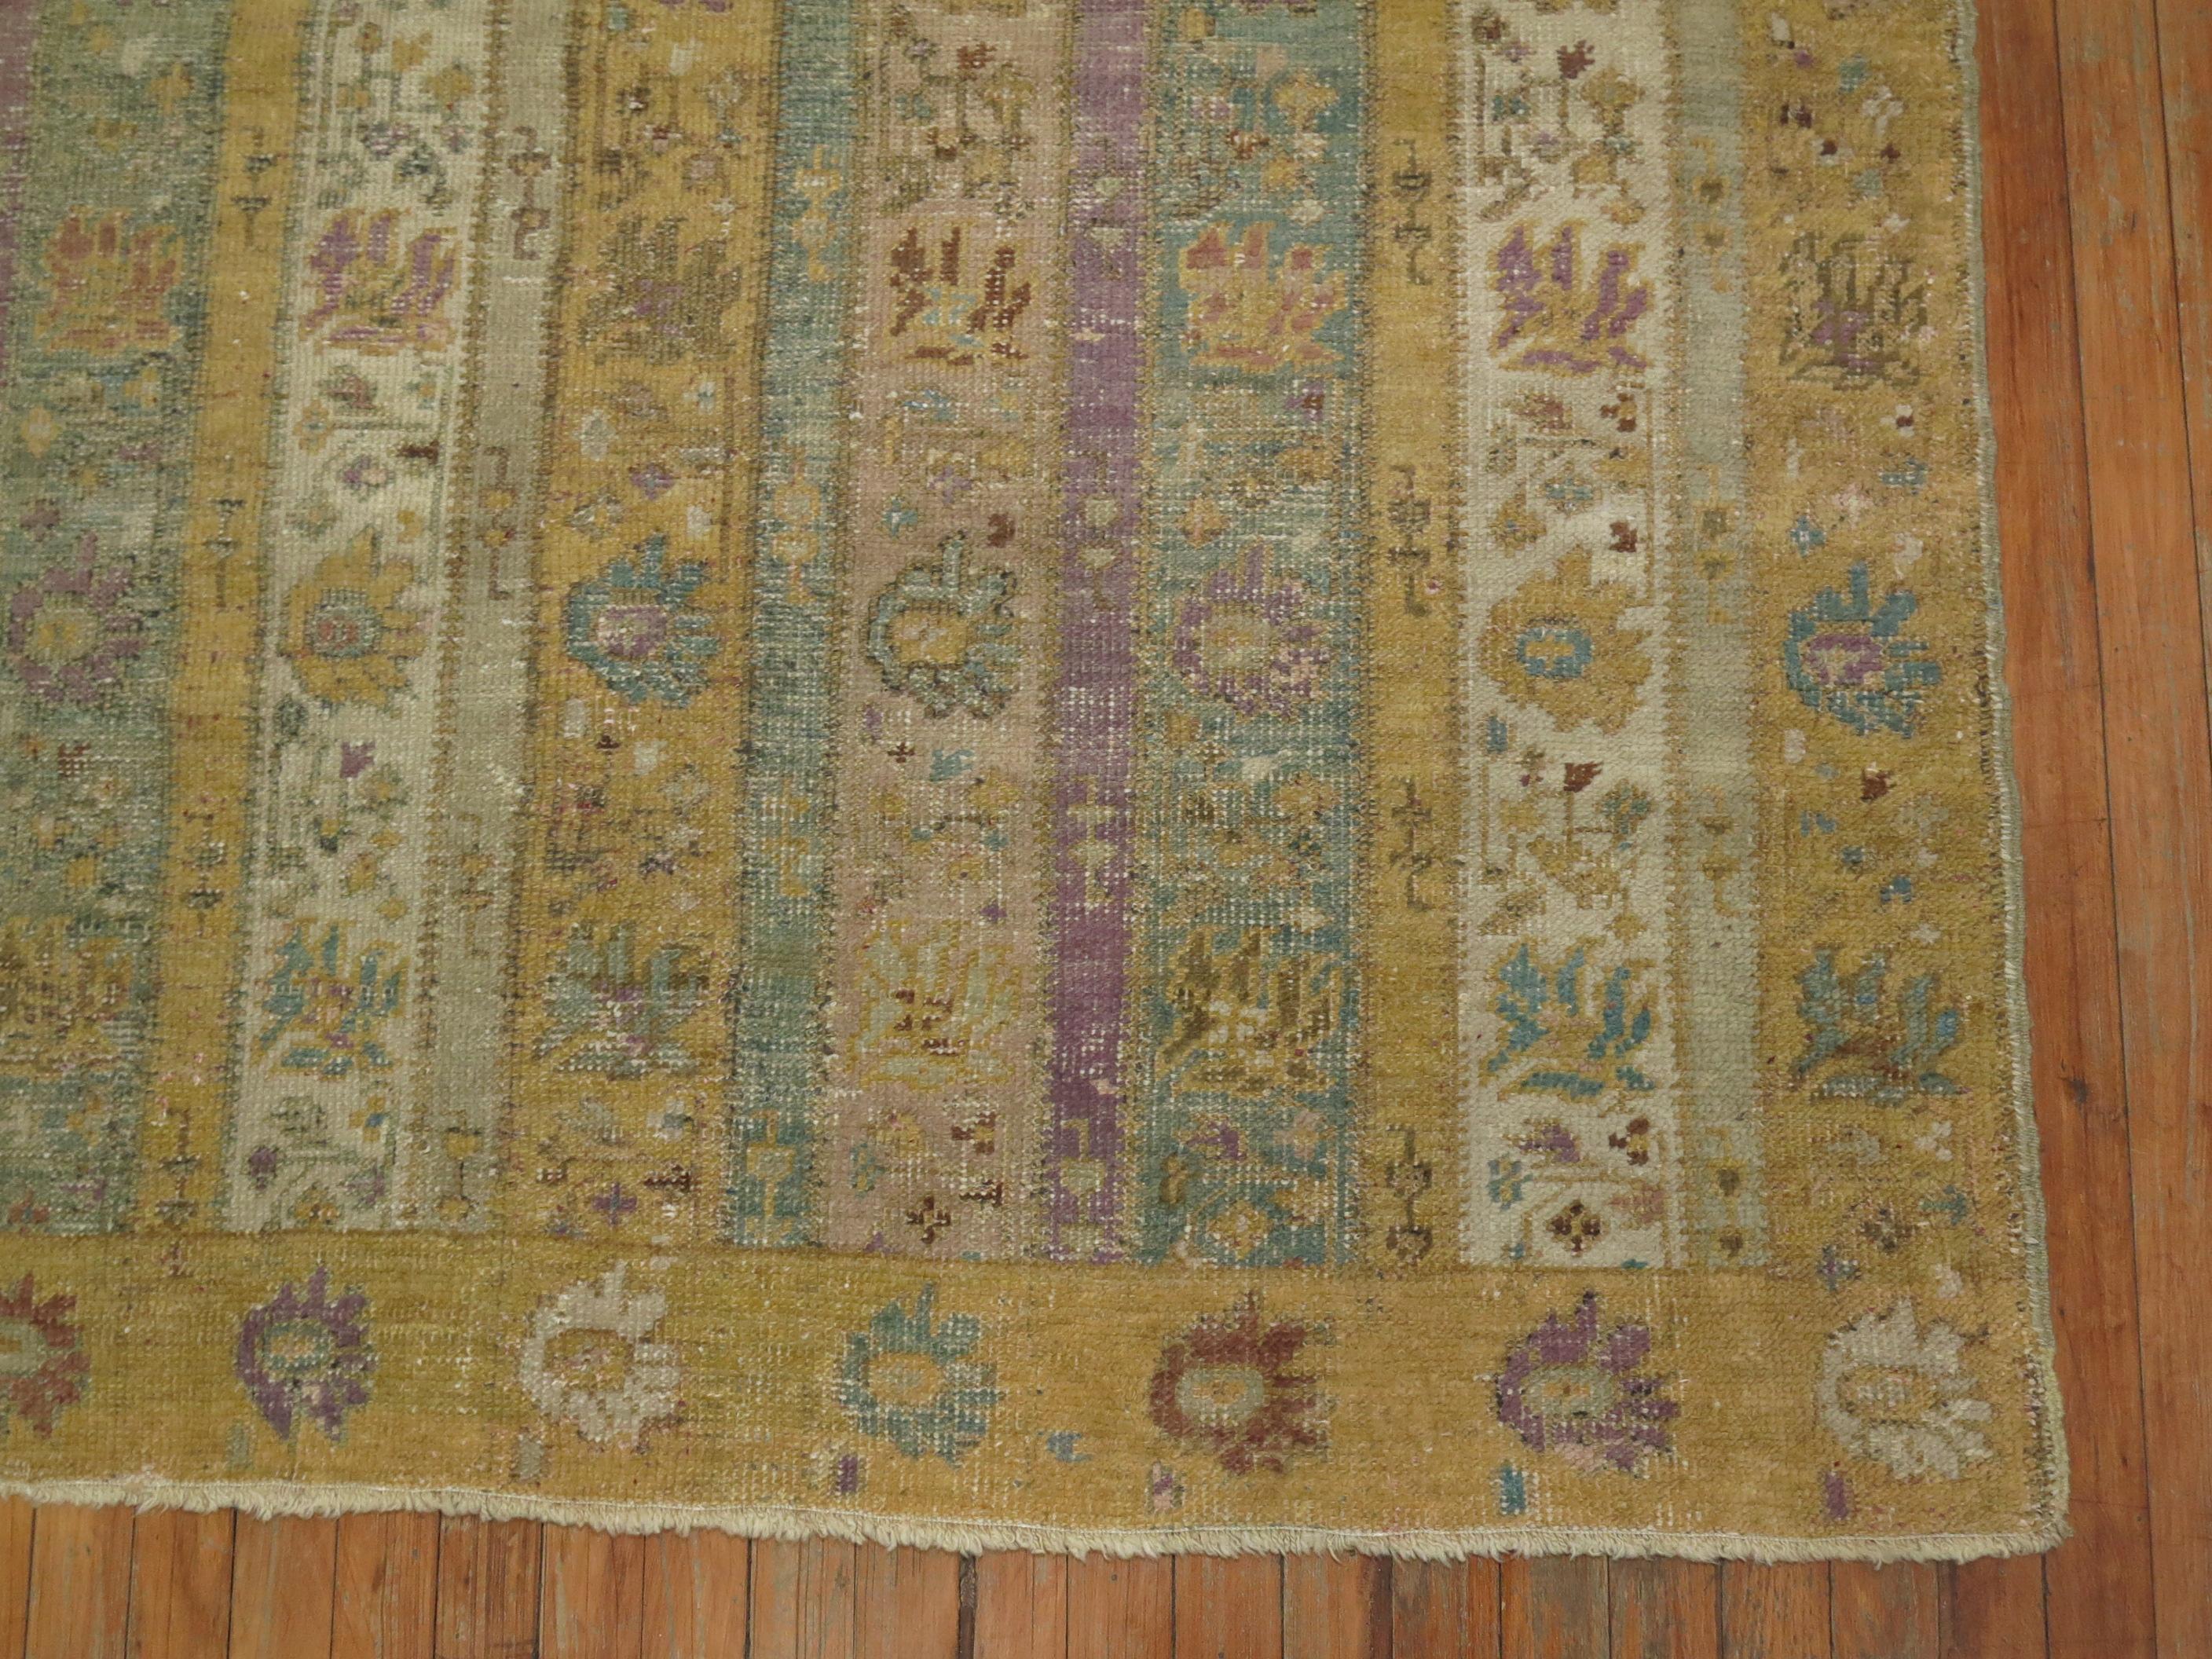 Square Turkish Ghiordes Rug in Plum, Sand Khaki, Celadon Accents In Fair Condition For Sale In New York, NY